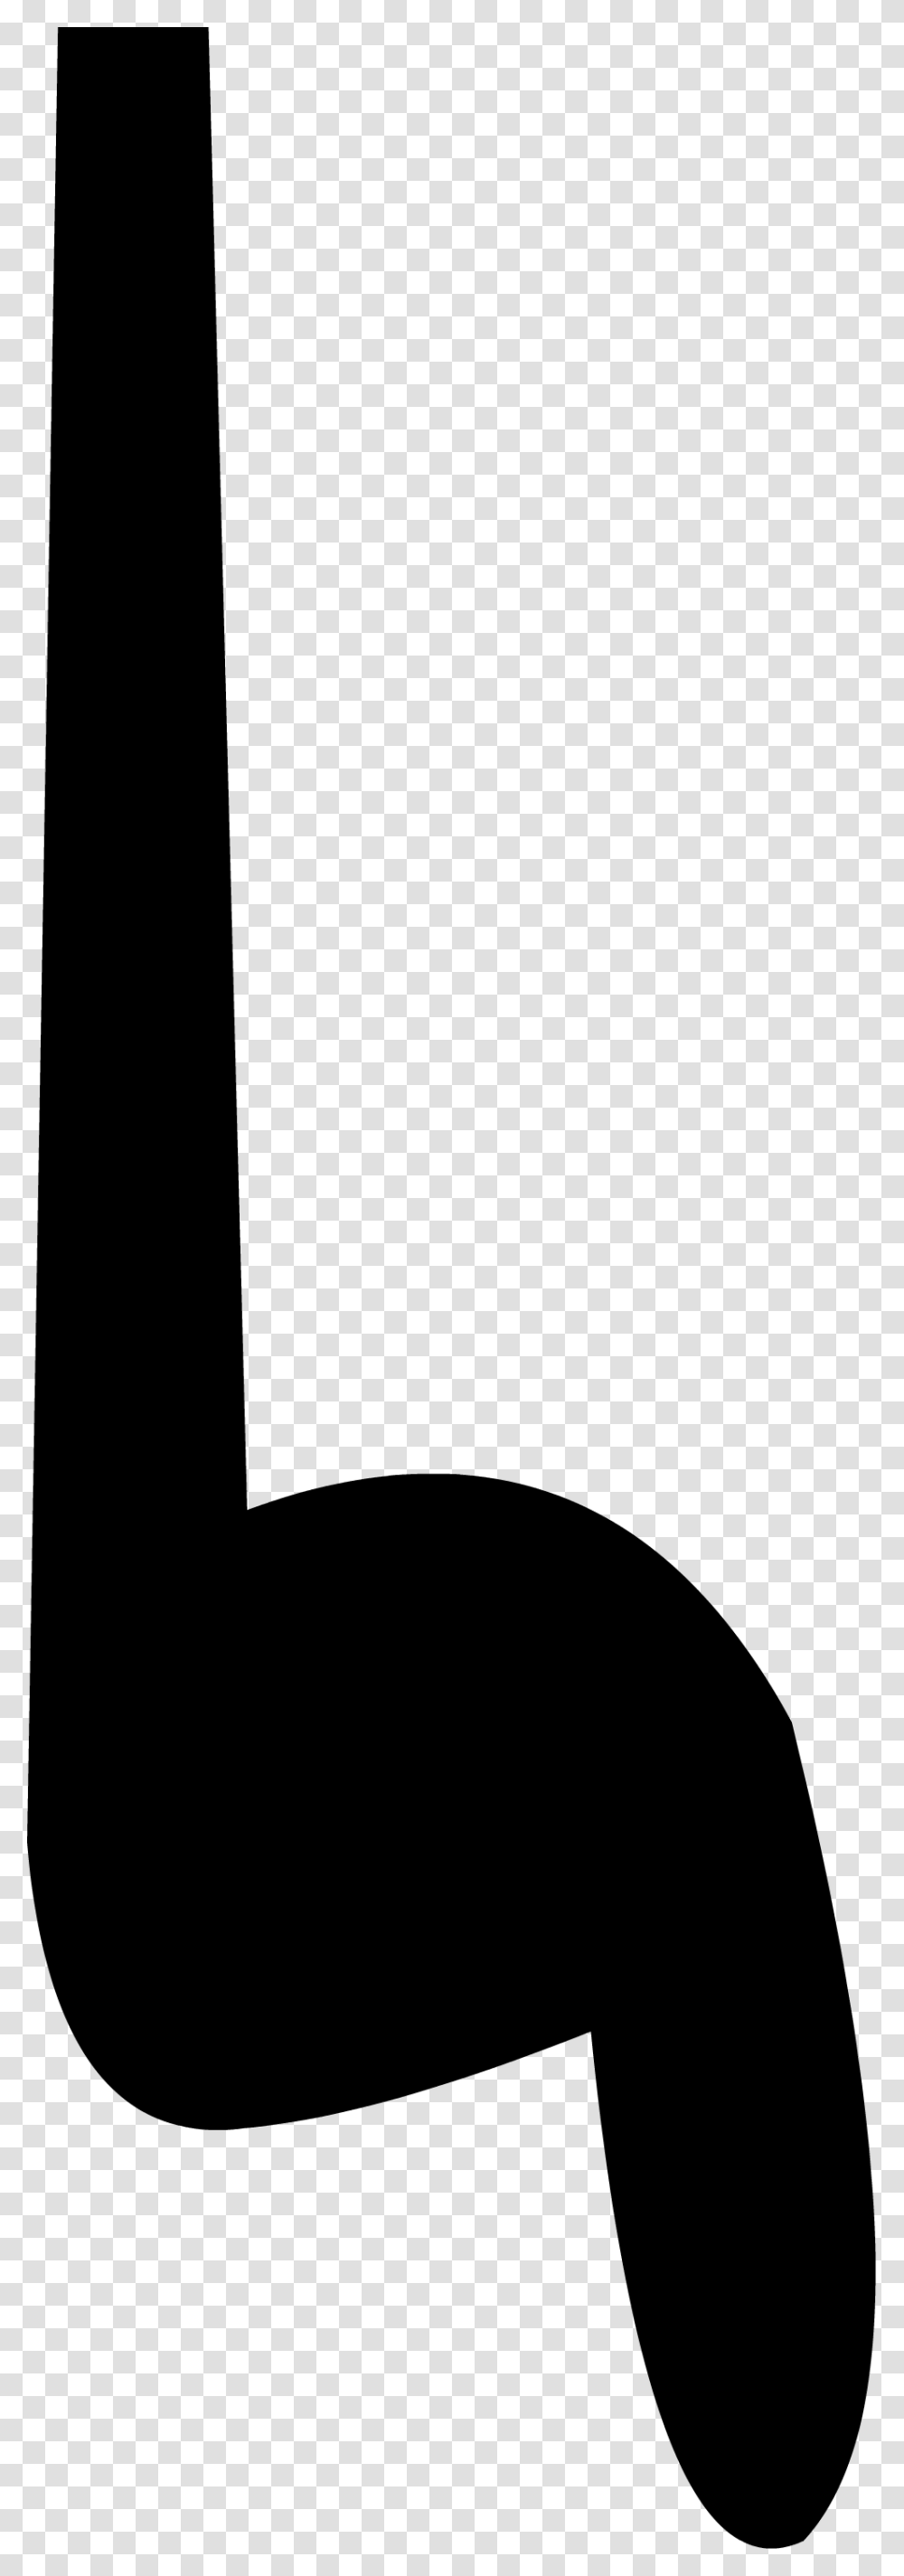 Ugly Point Finger Arm Bfdi Pointing Arm Assets, Gray, World Of Warcraft Transparent Png